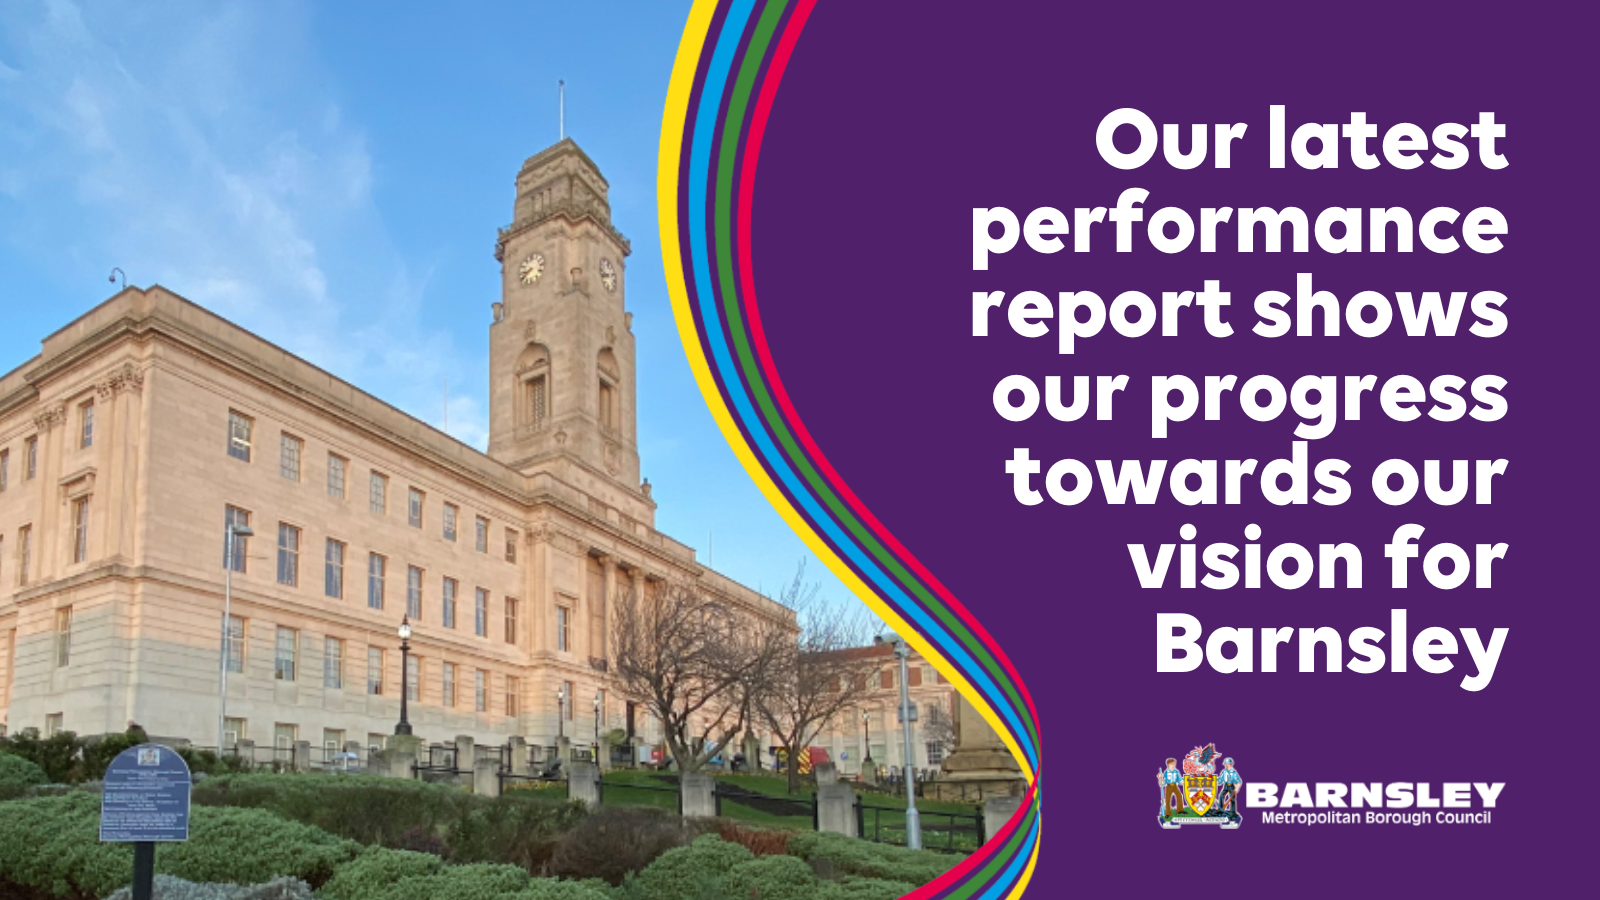 Our latest performance report shows our progress towards our vision for Barnsley